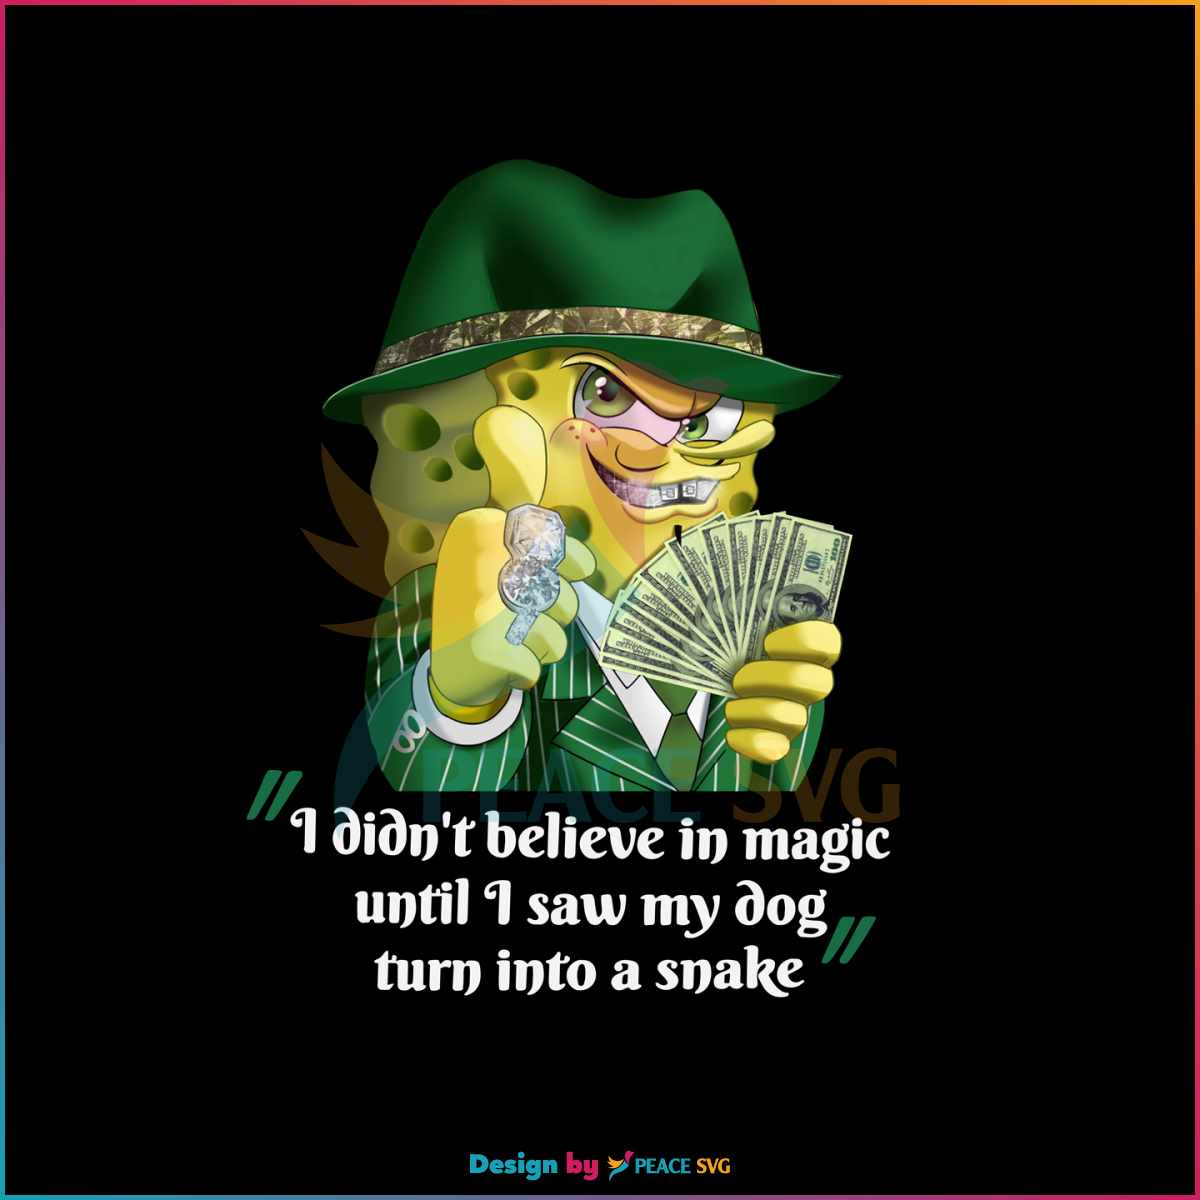 gangster-sponge-quote-classic-meme-png-silhouette-file